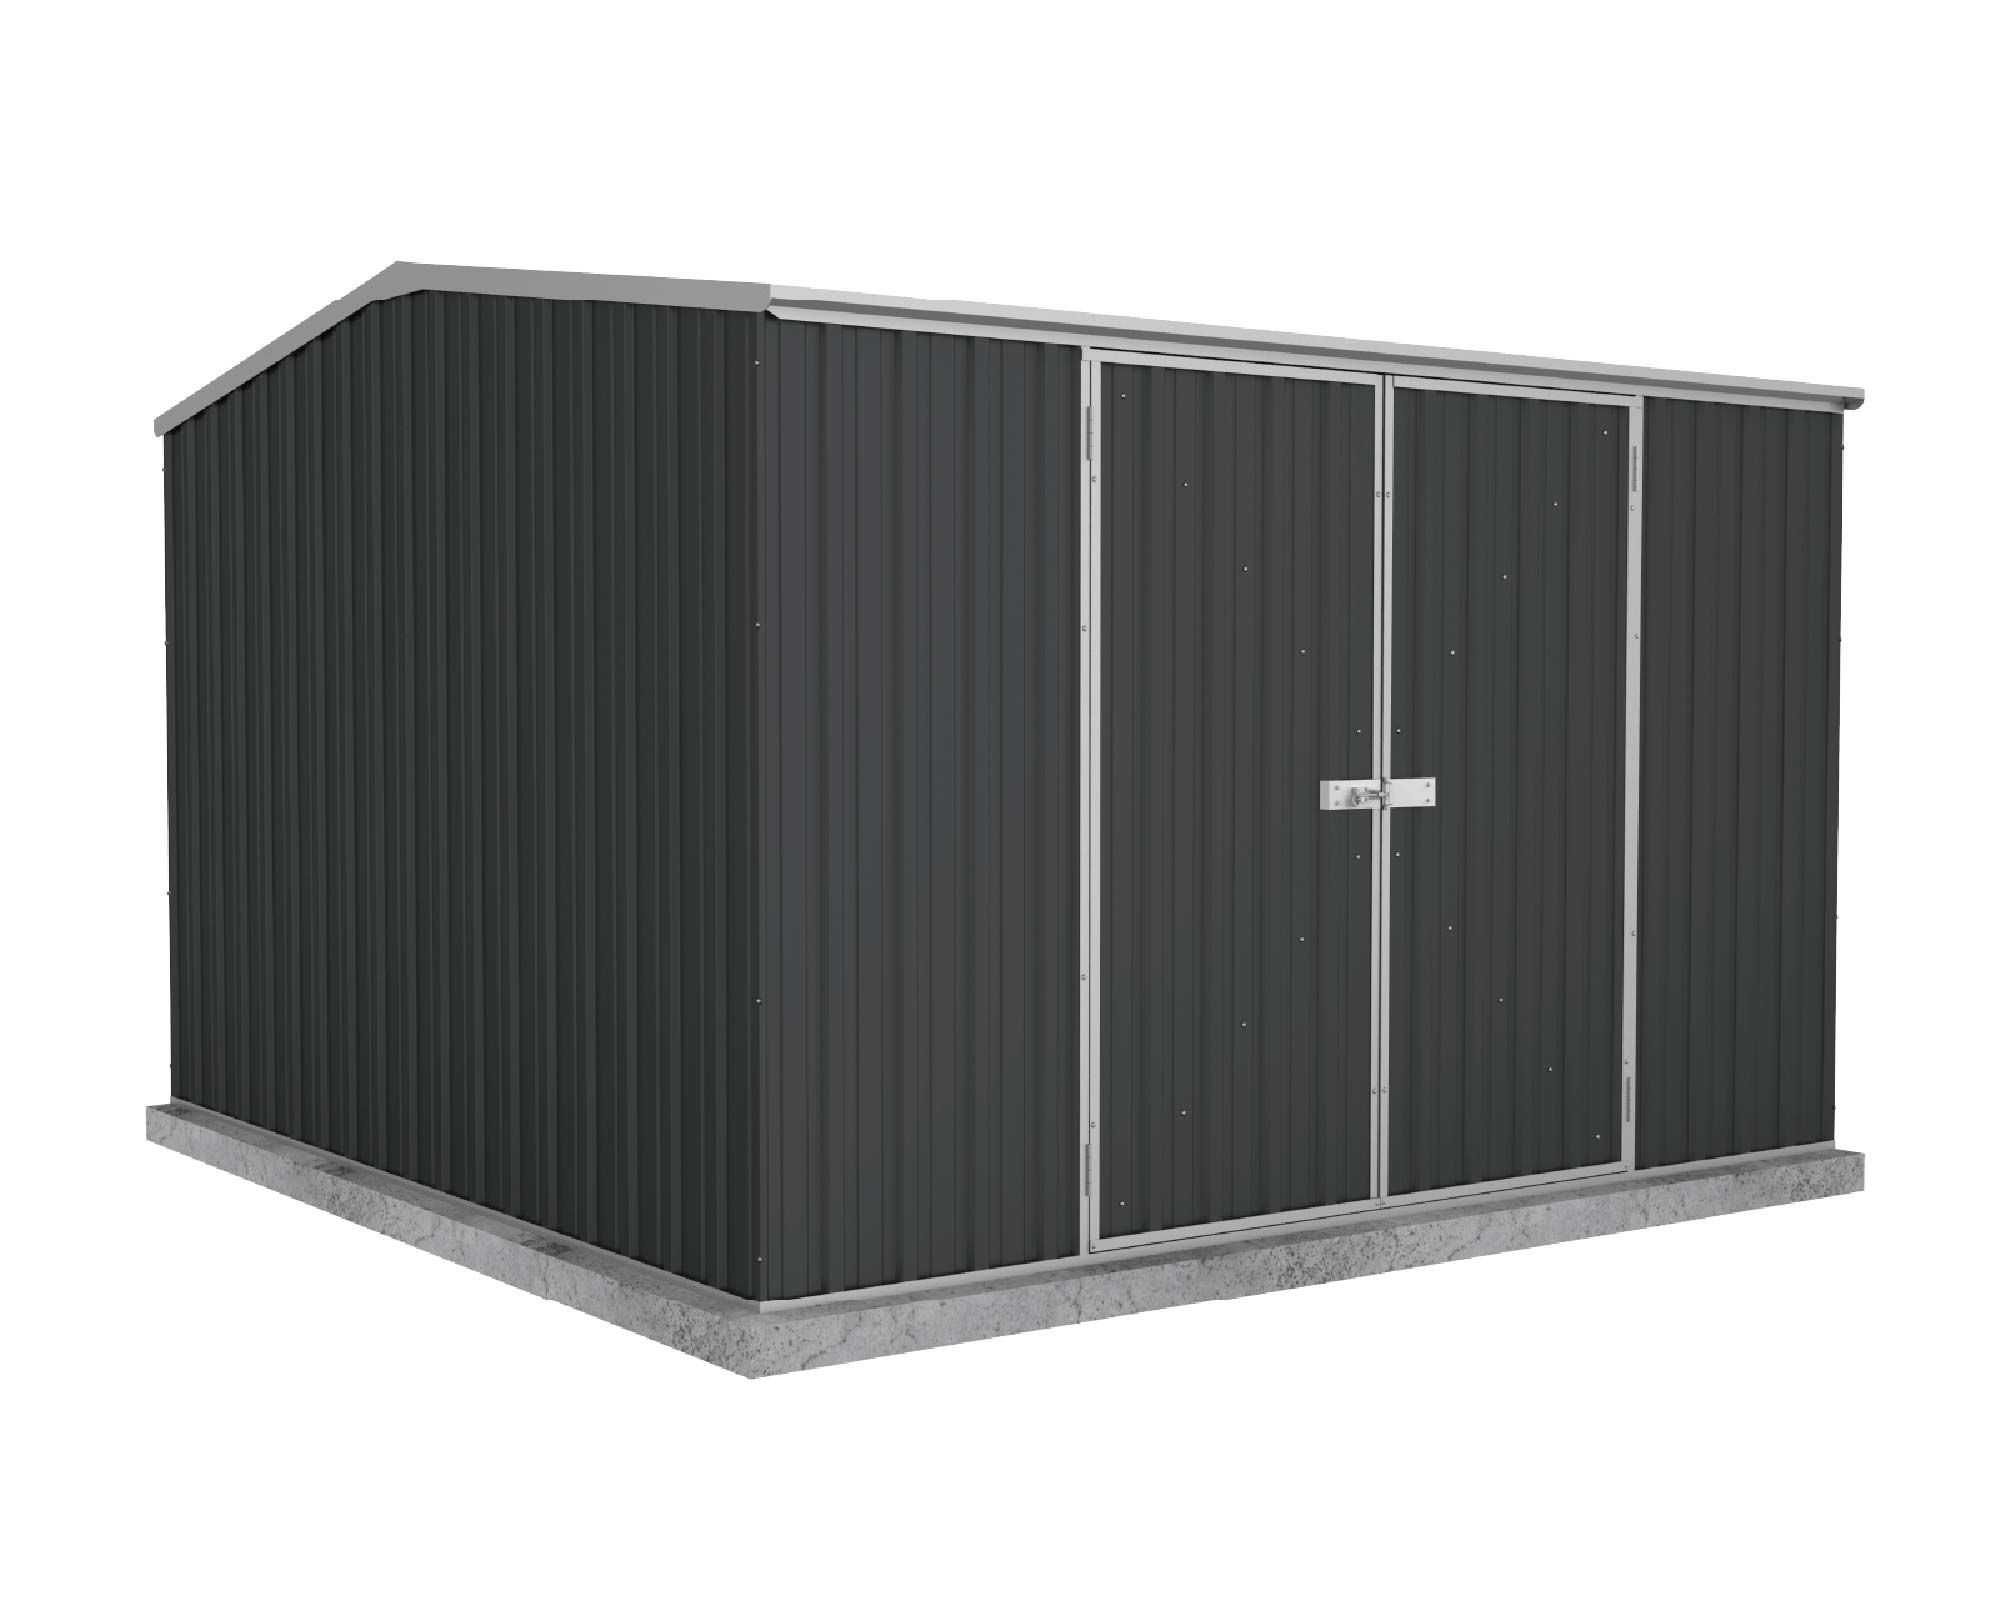 Premier Garden Shed Kit 3m x 3m x 2.06 in Monument